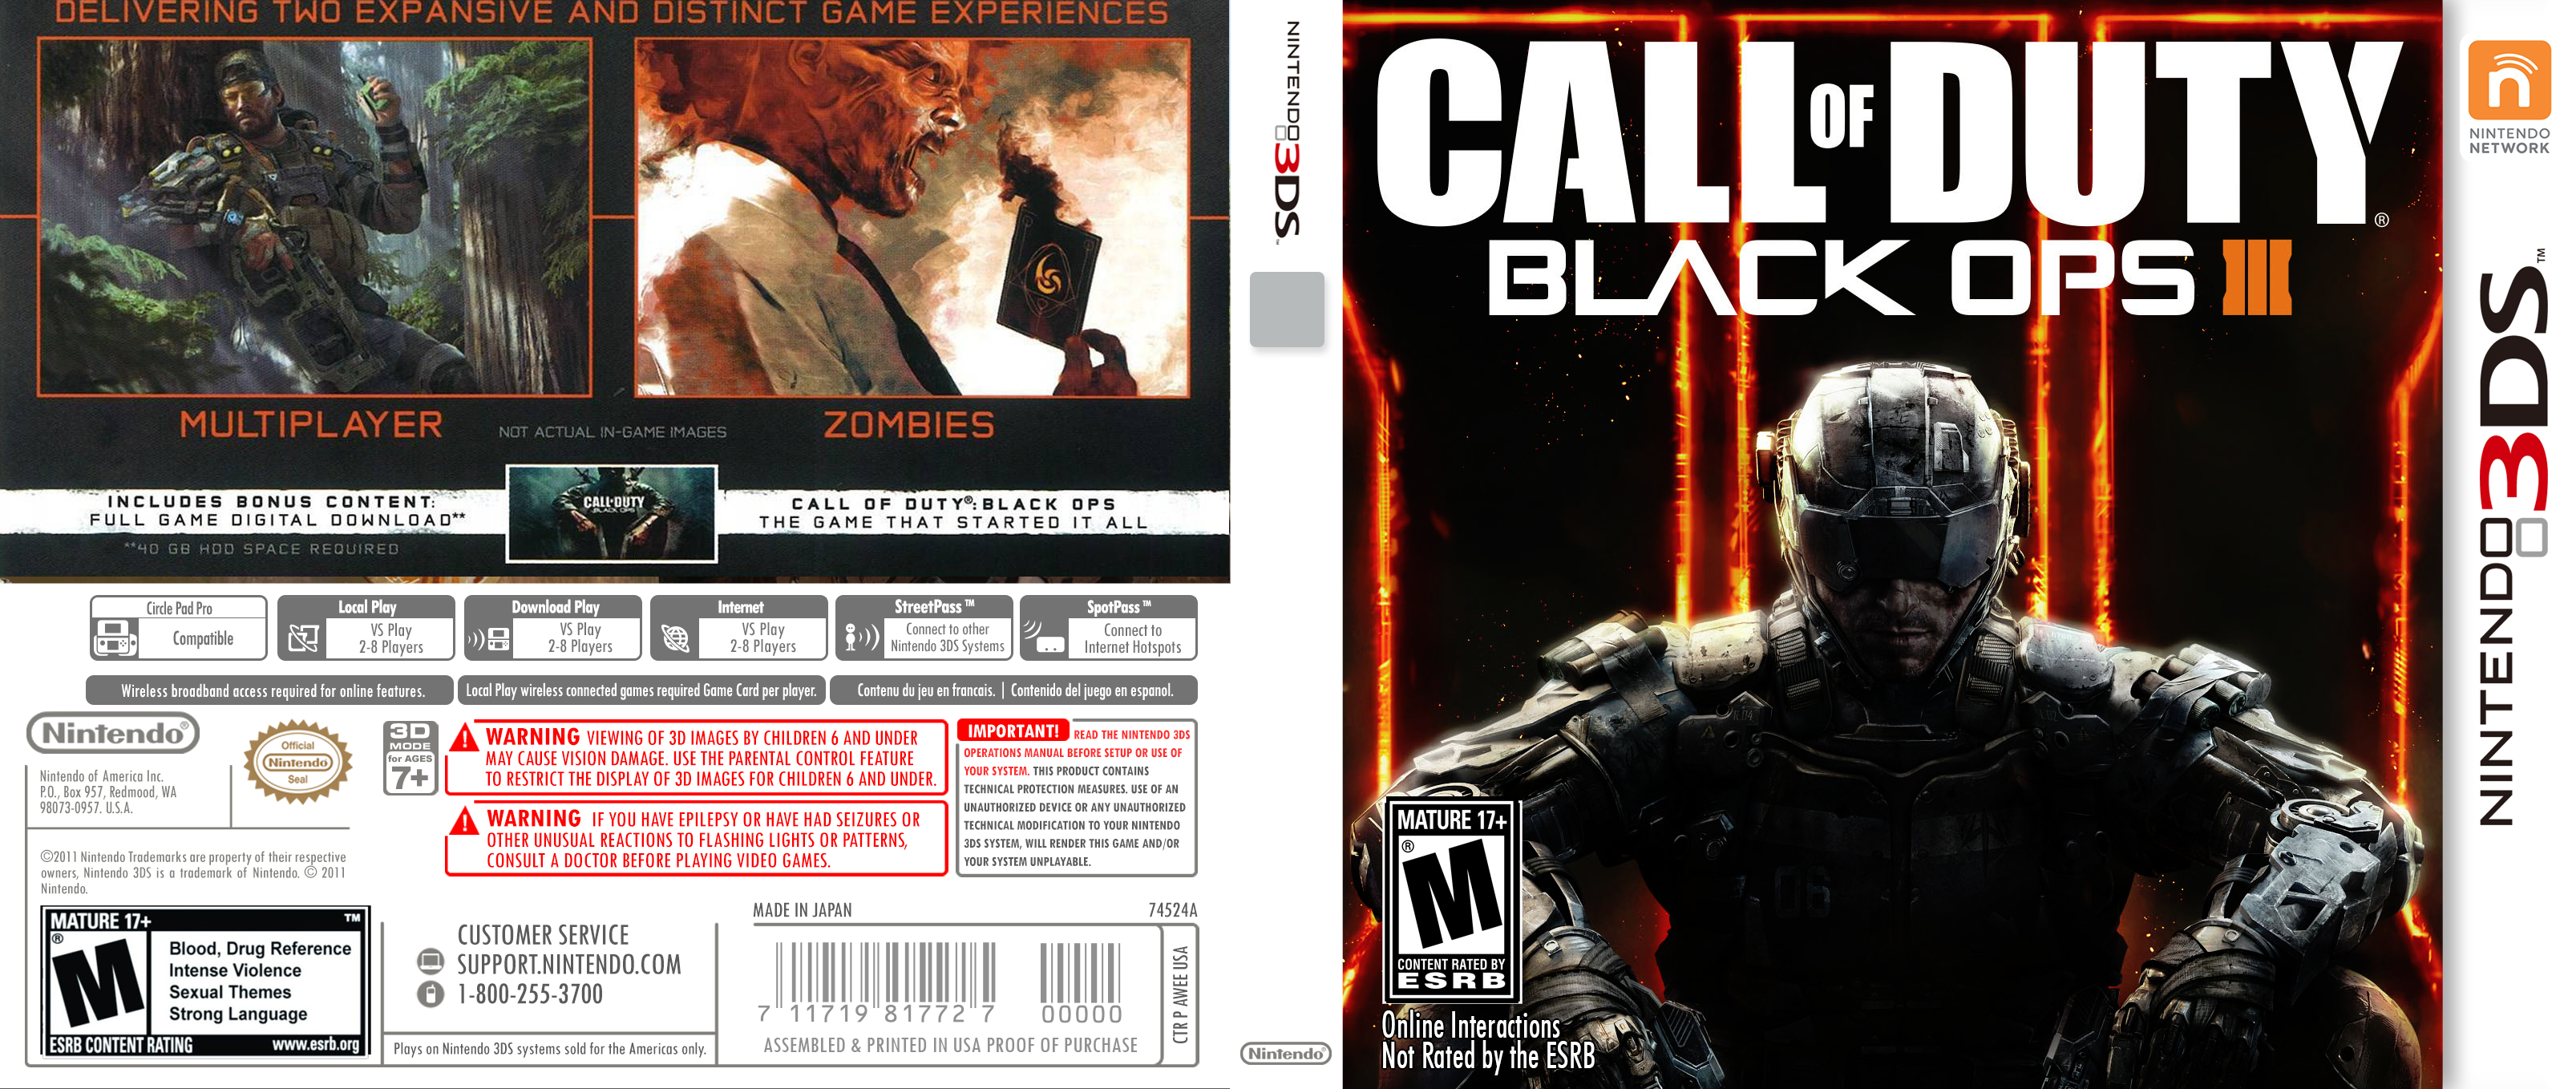 Call of duty 4 nintendo ds. Call of Duty Black ops 3 диск. Call of Duty Nintendo 3ds. Call of Duty Black ops III обложка. Call of Duty Black ops Nintendo DS.